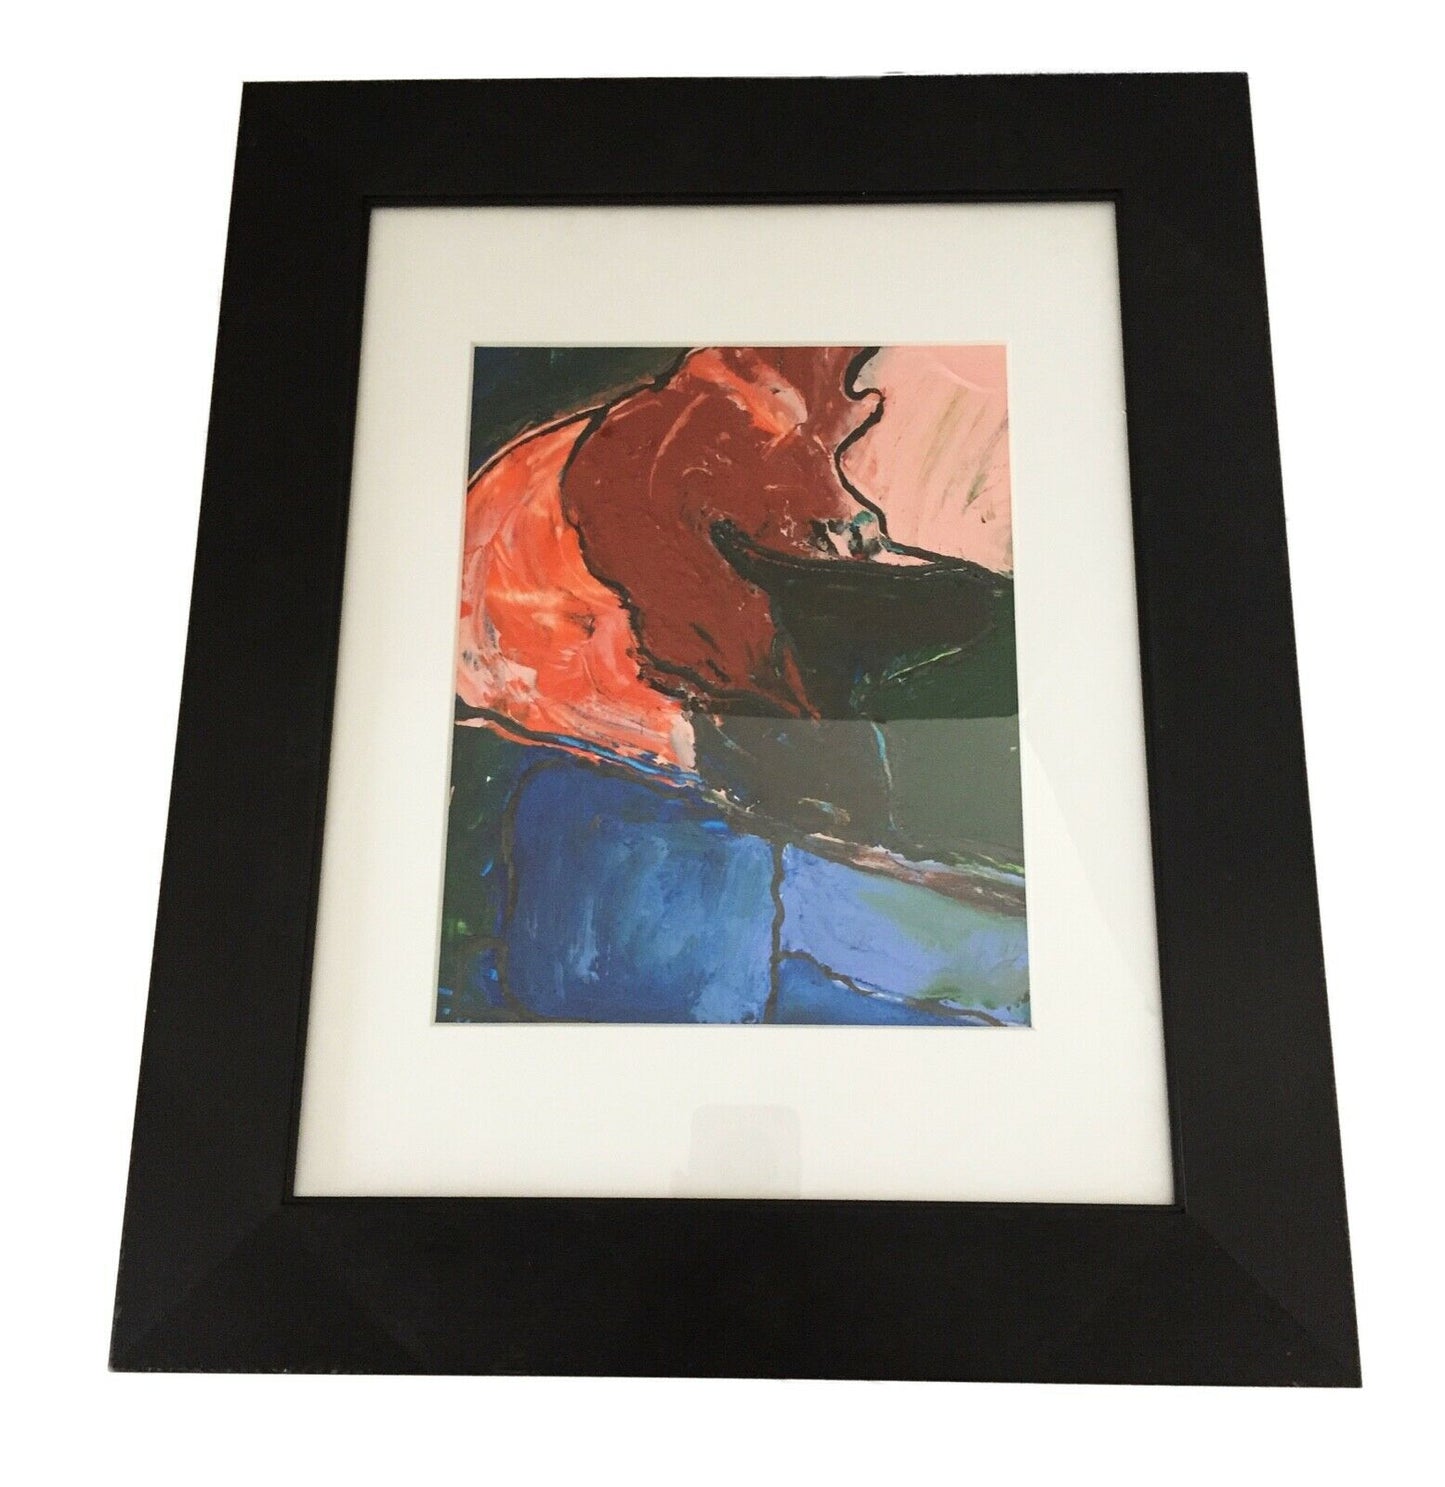 Acrylic on Paper Framed Abstract 17.75" by 14.75" #2005